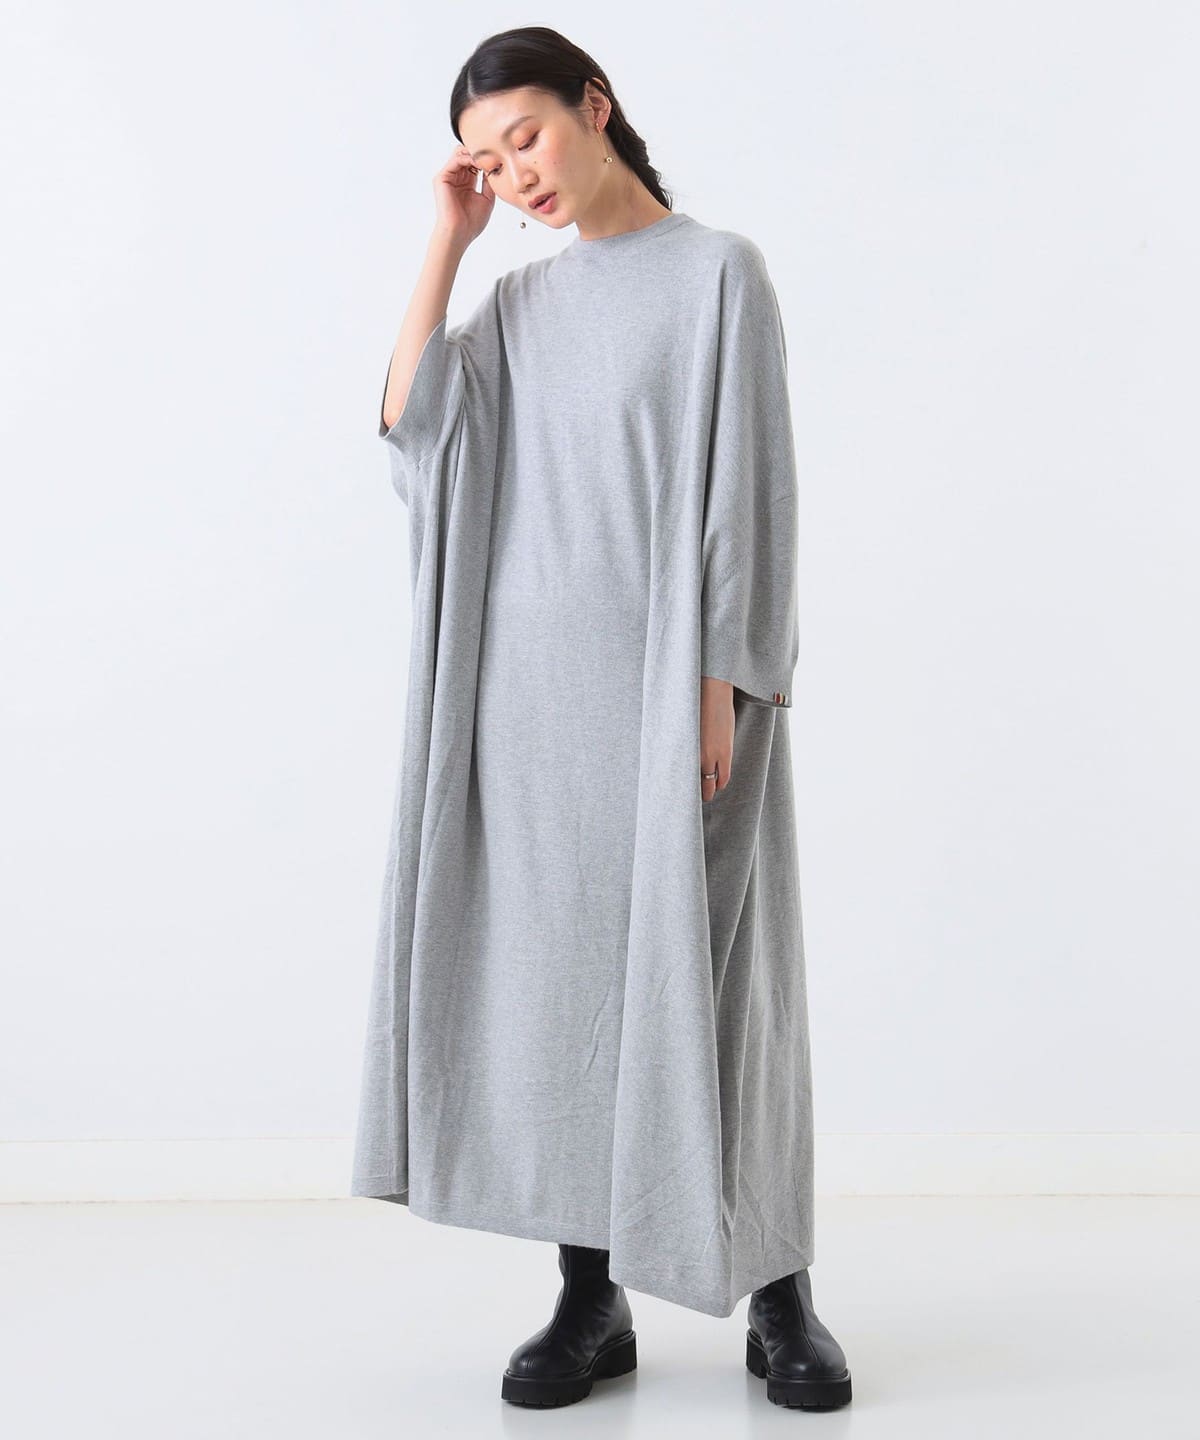 Demi-Luxe BEAMS（デミルクス ビームス）extreme cashmere / SPOOK ...